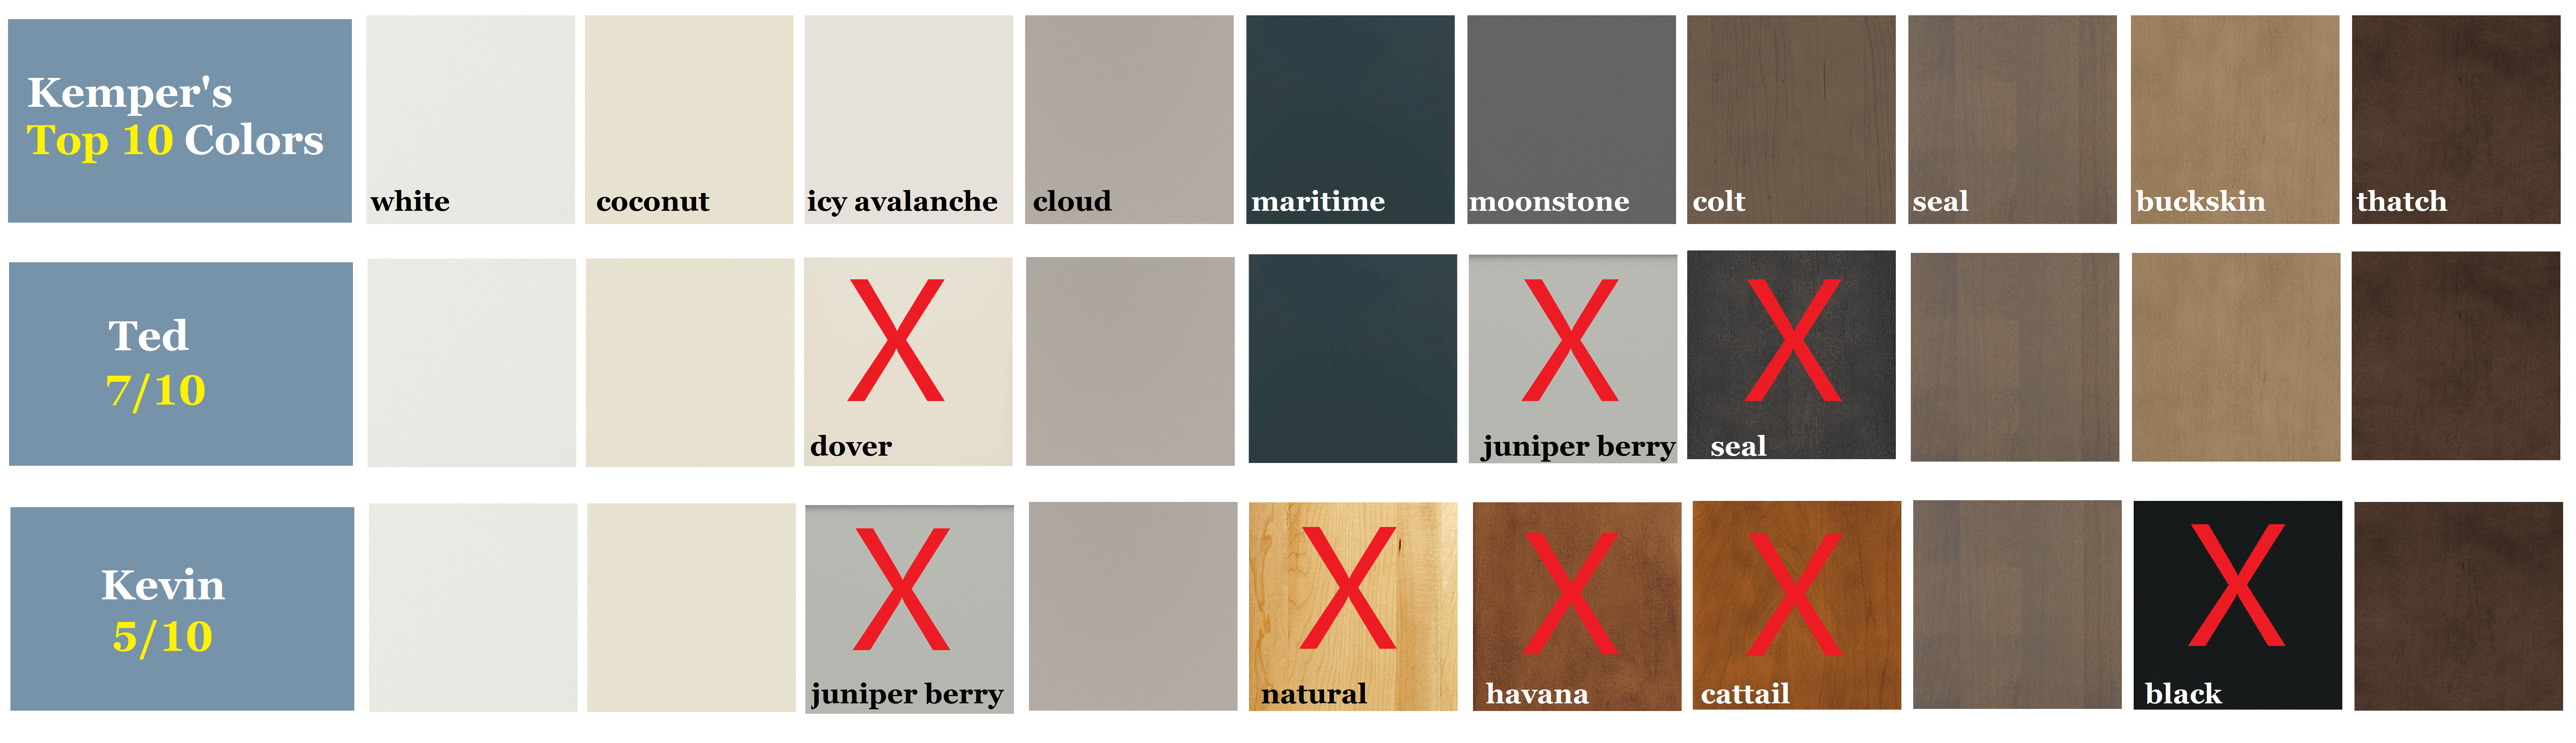 Kemper Cabinet's Top 10 Colors/ Finishes 